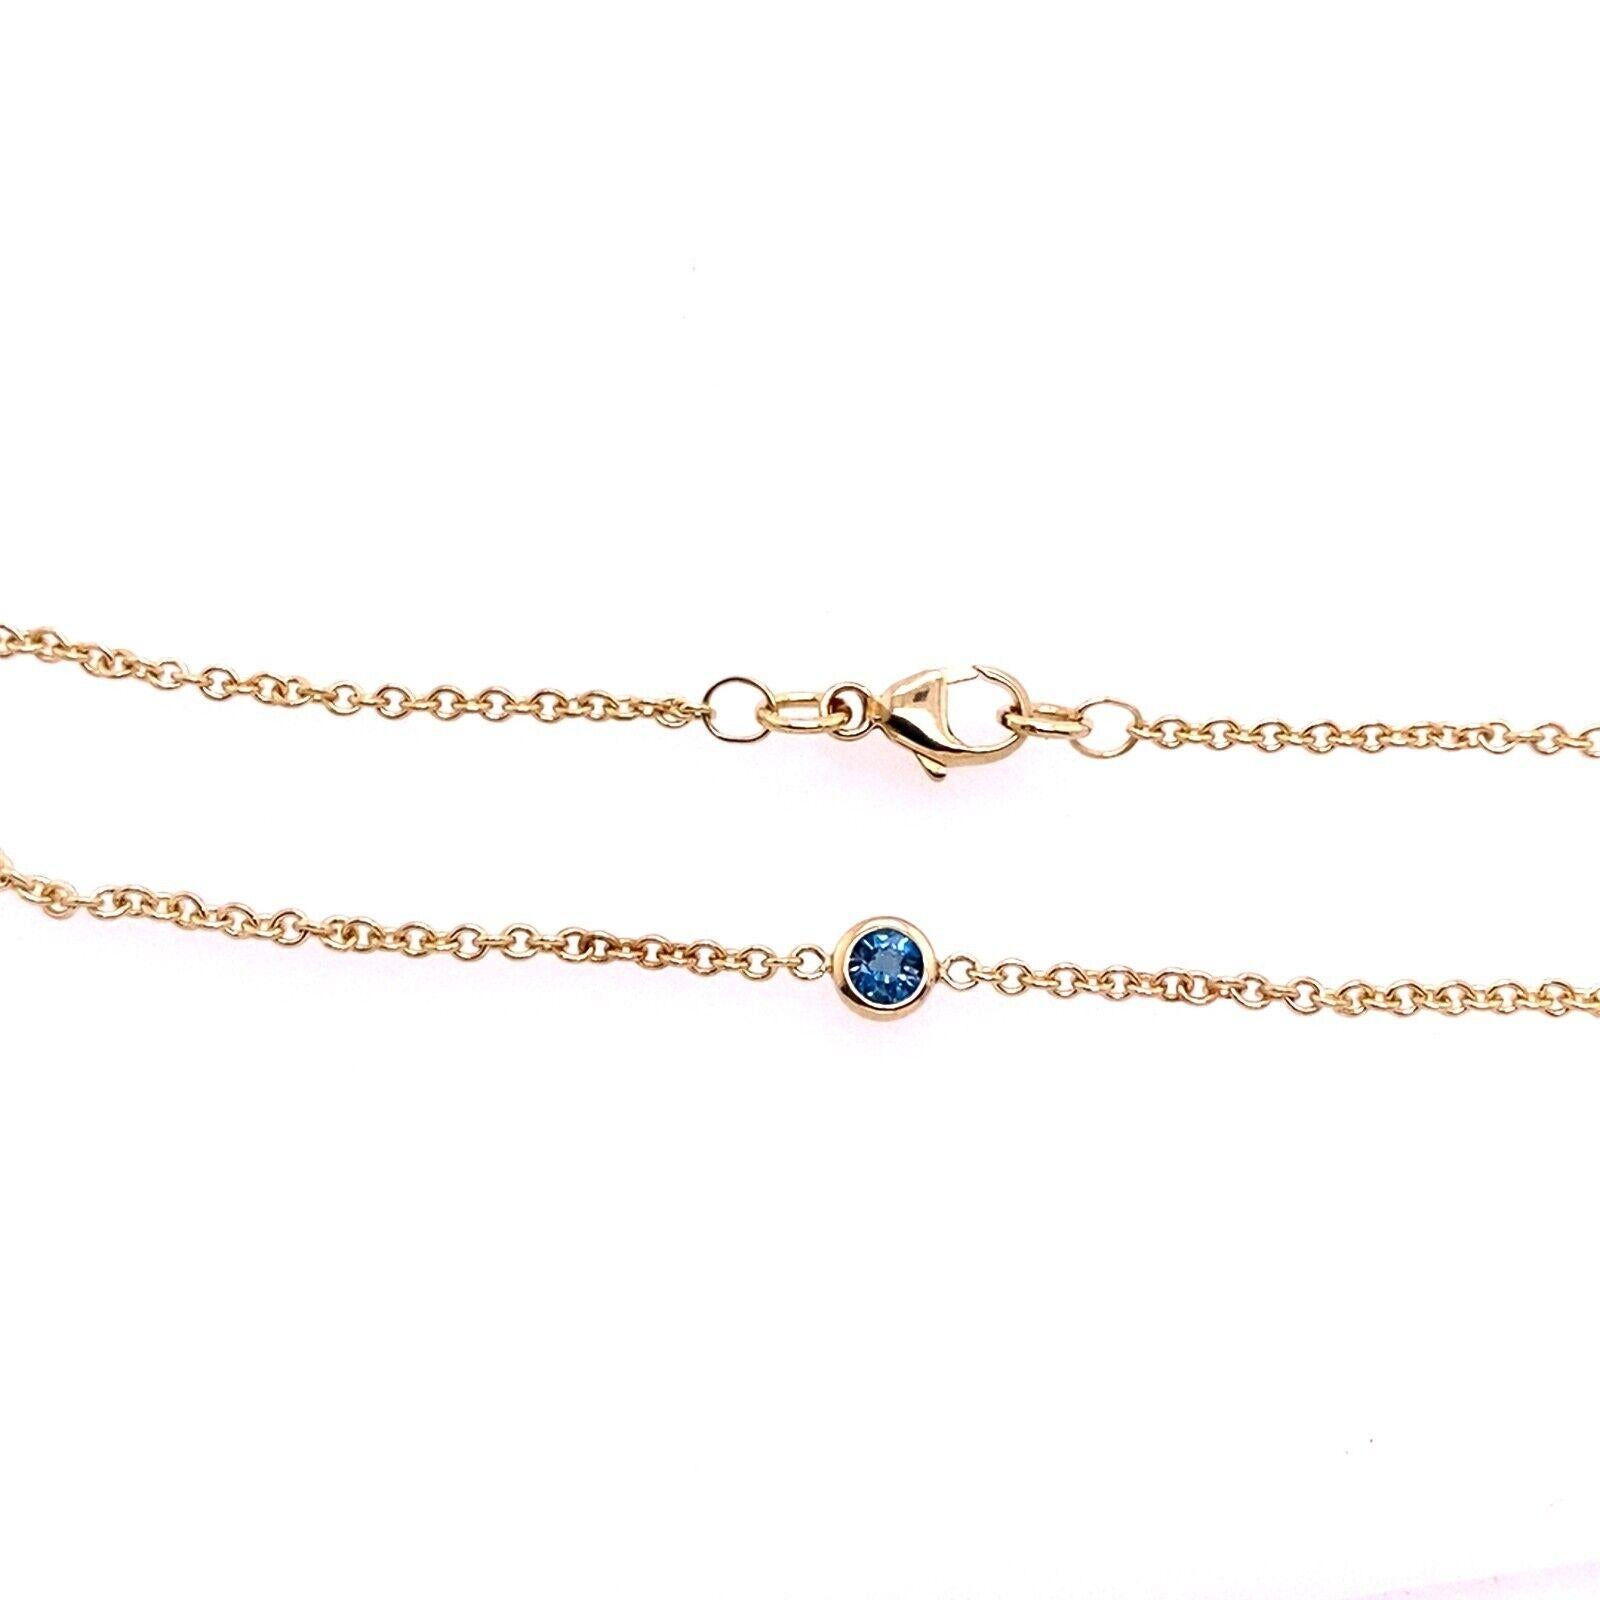 This December birthstone bracelet set, crafted in 9ct yellow gold is the perfect gift to celebrate one’s birth month. The bracelet comes with 1 round cut blue topaz, which is the birthstone for December, and a lobster clasp for easy